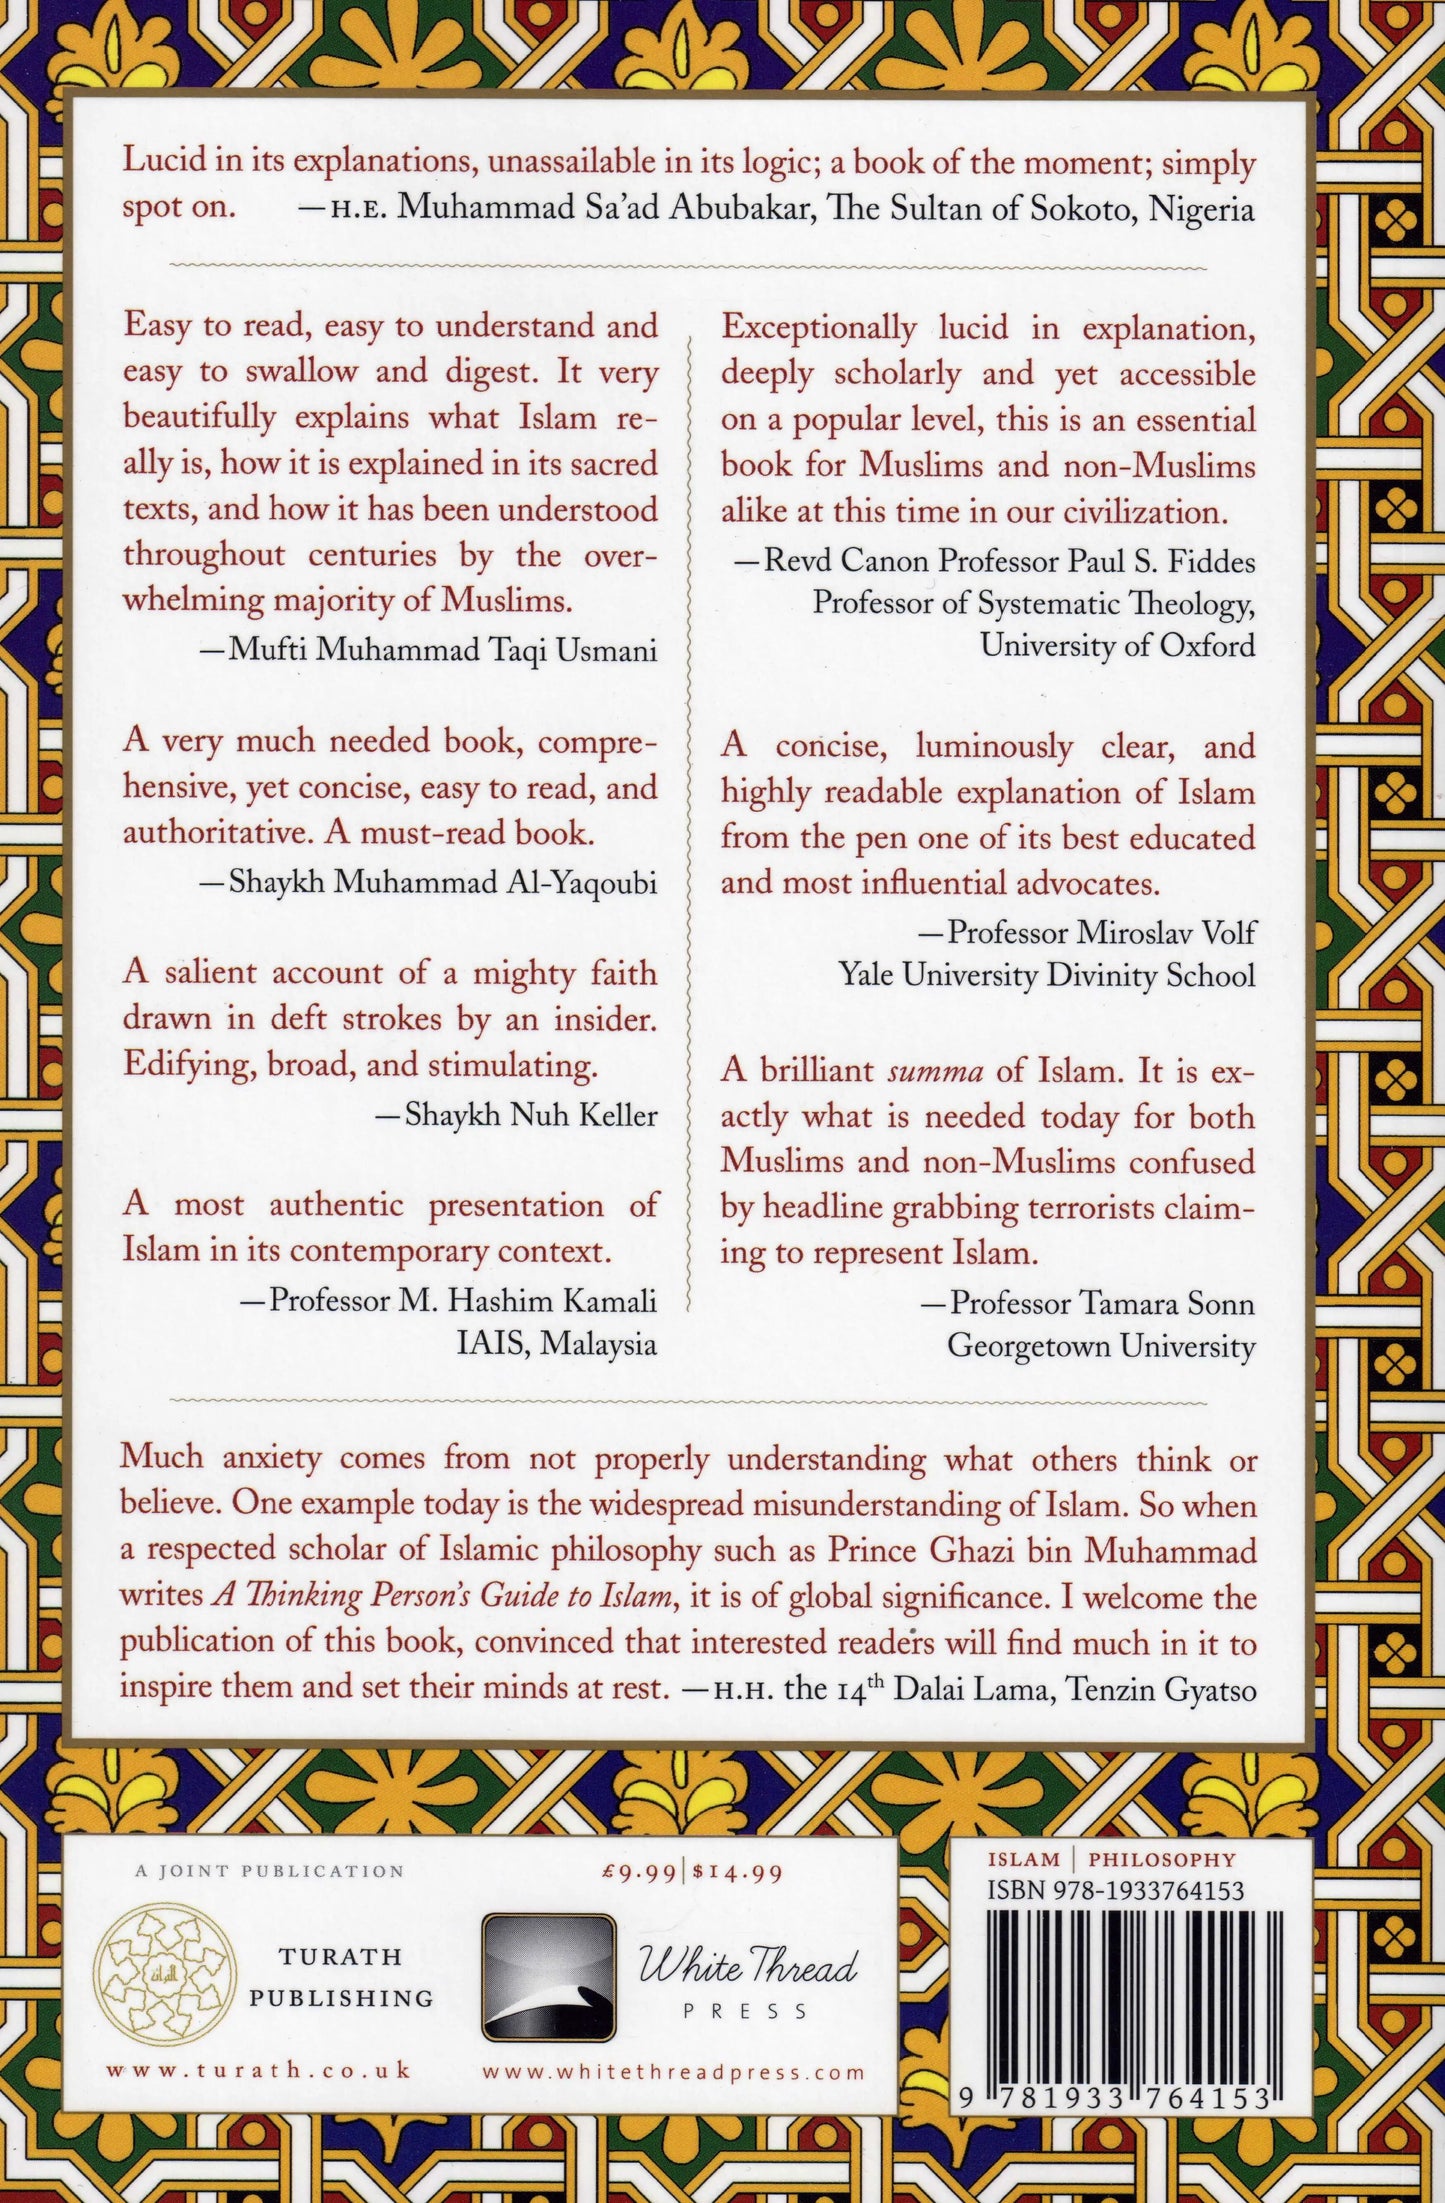 A Thinking Person’s Guide to Islam : The Essence of Islam in 12 Verses from the Qur’an